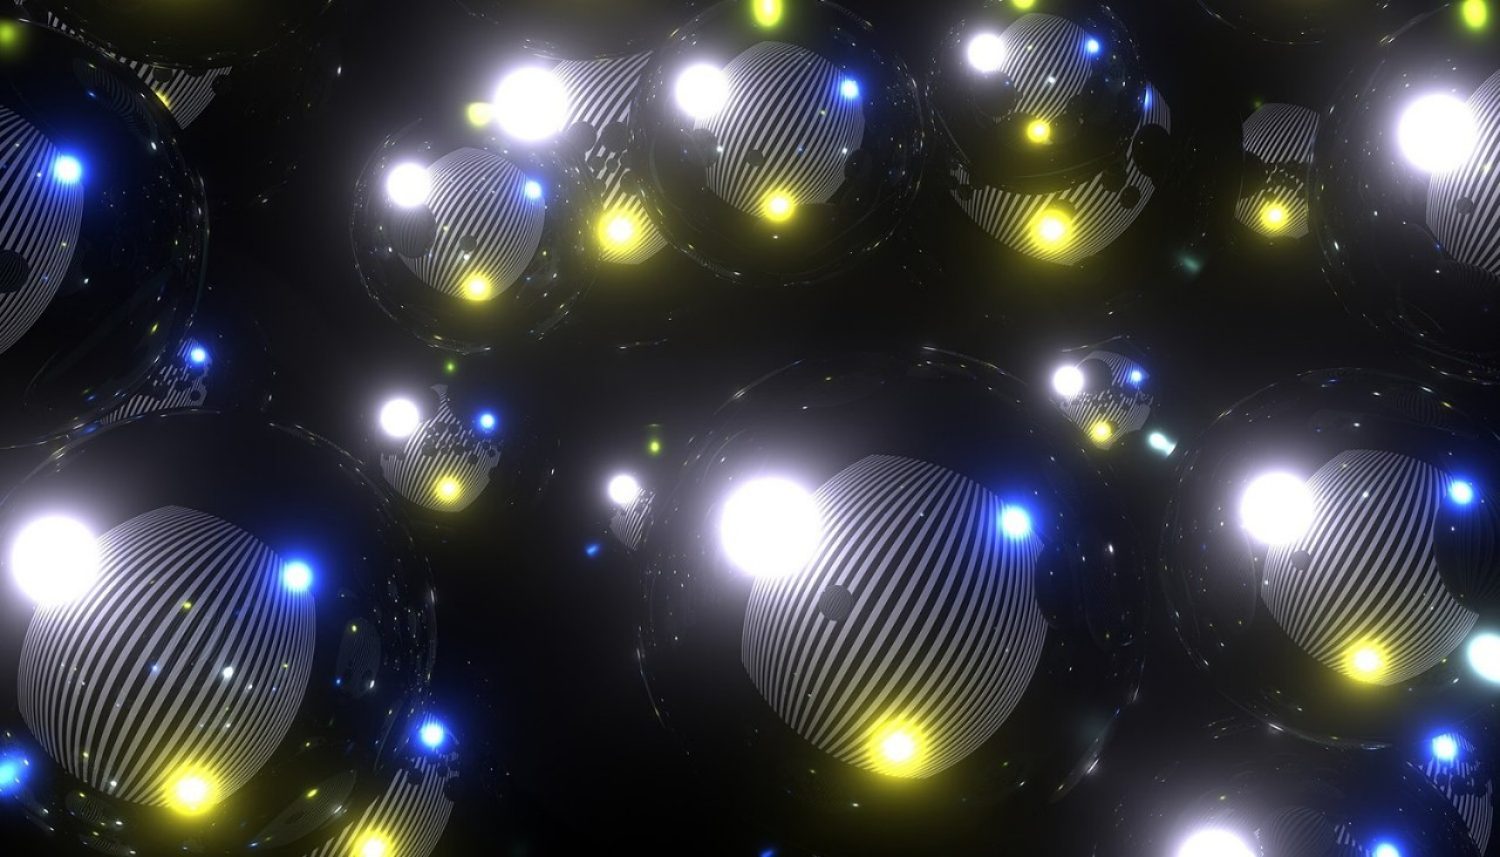 An abstract image with white, blue, and yellow lights against a black background